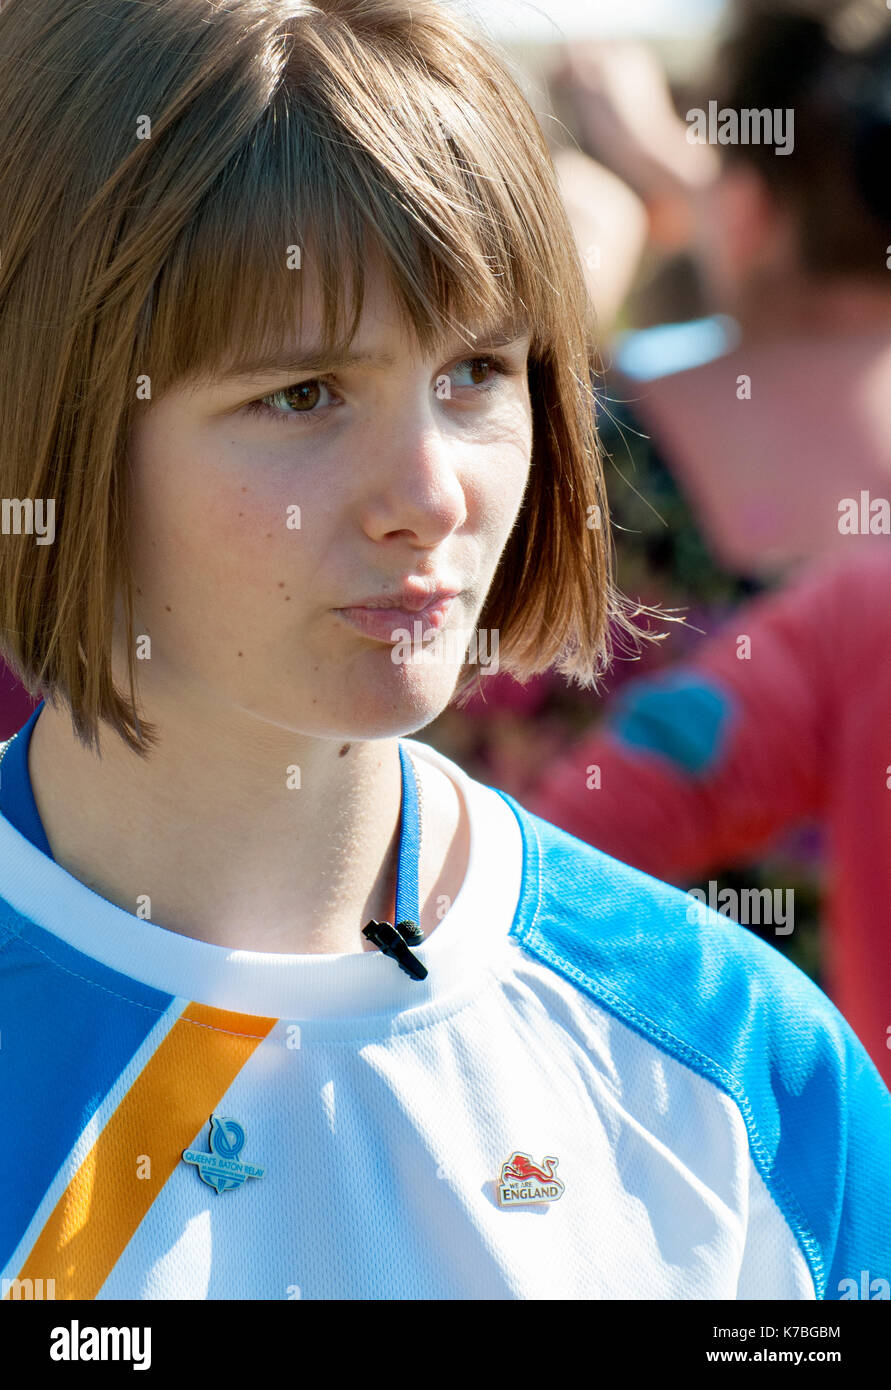 Millie Knight (15 yr old paralympic partially-sighted skier and British flag-bearer at the Sochi 2014 Paralympics) at the Queen's Baton Relay, Tonbrid Stock Photo